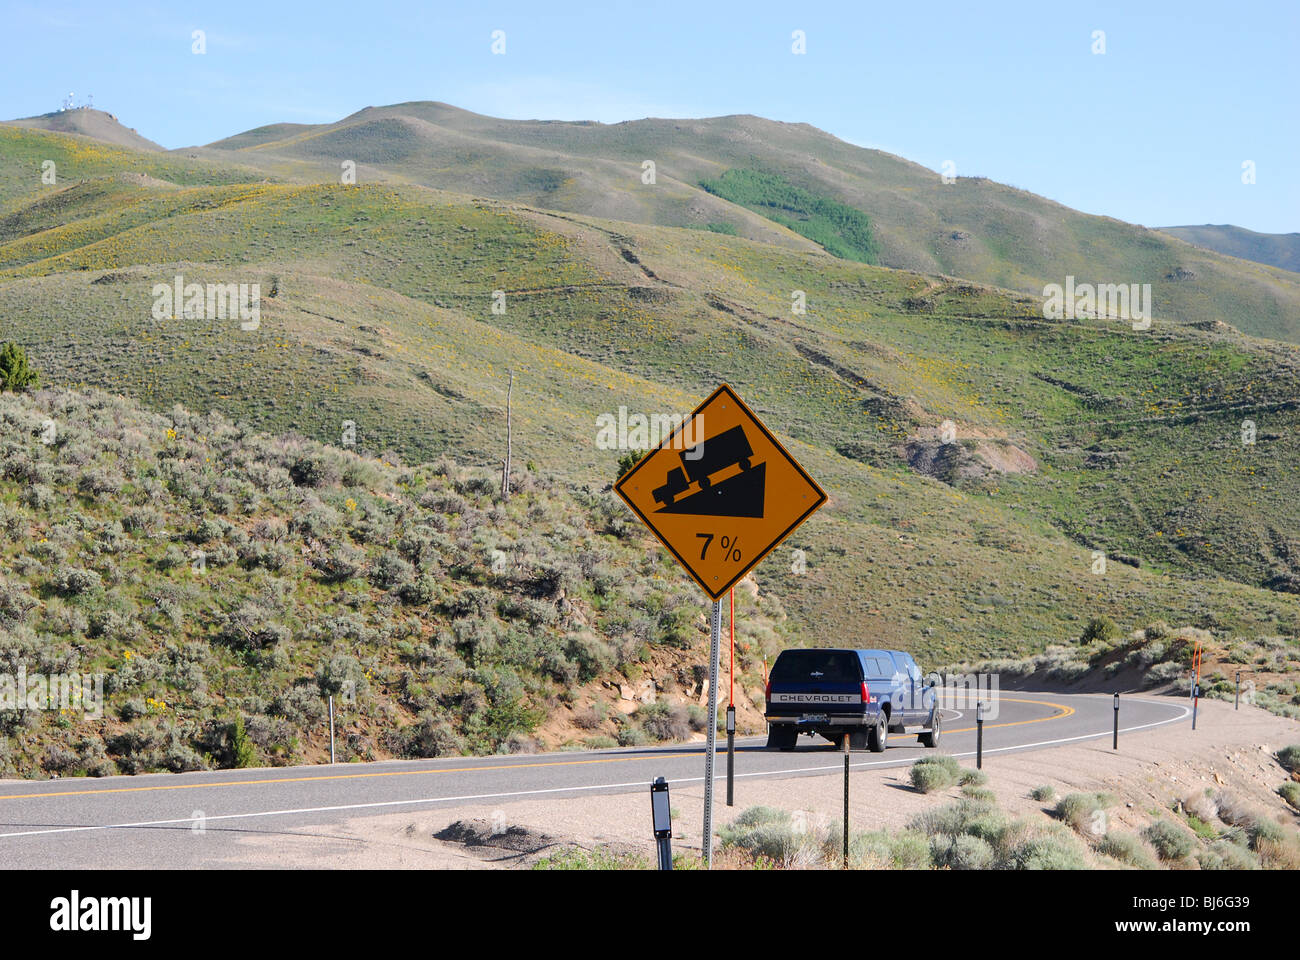 The Actual Maths: What Do the Percentages Mean on Steep Road Warning Signs?